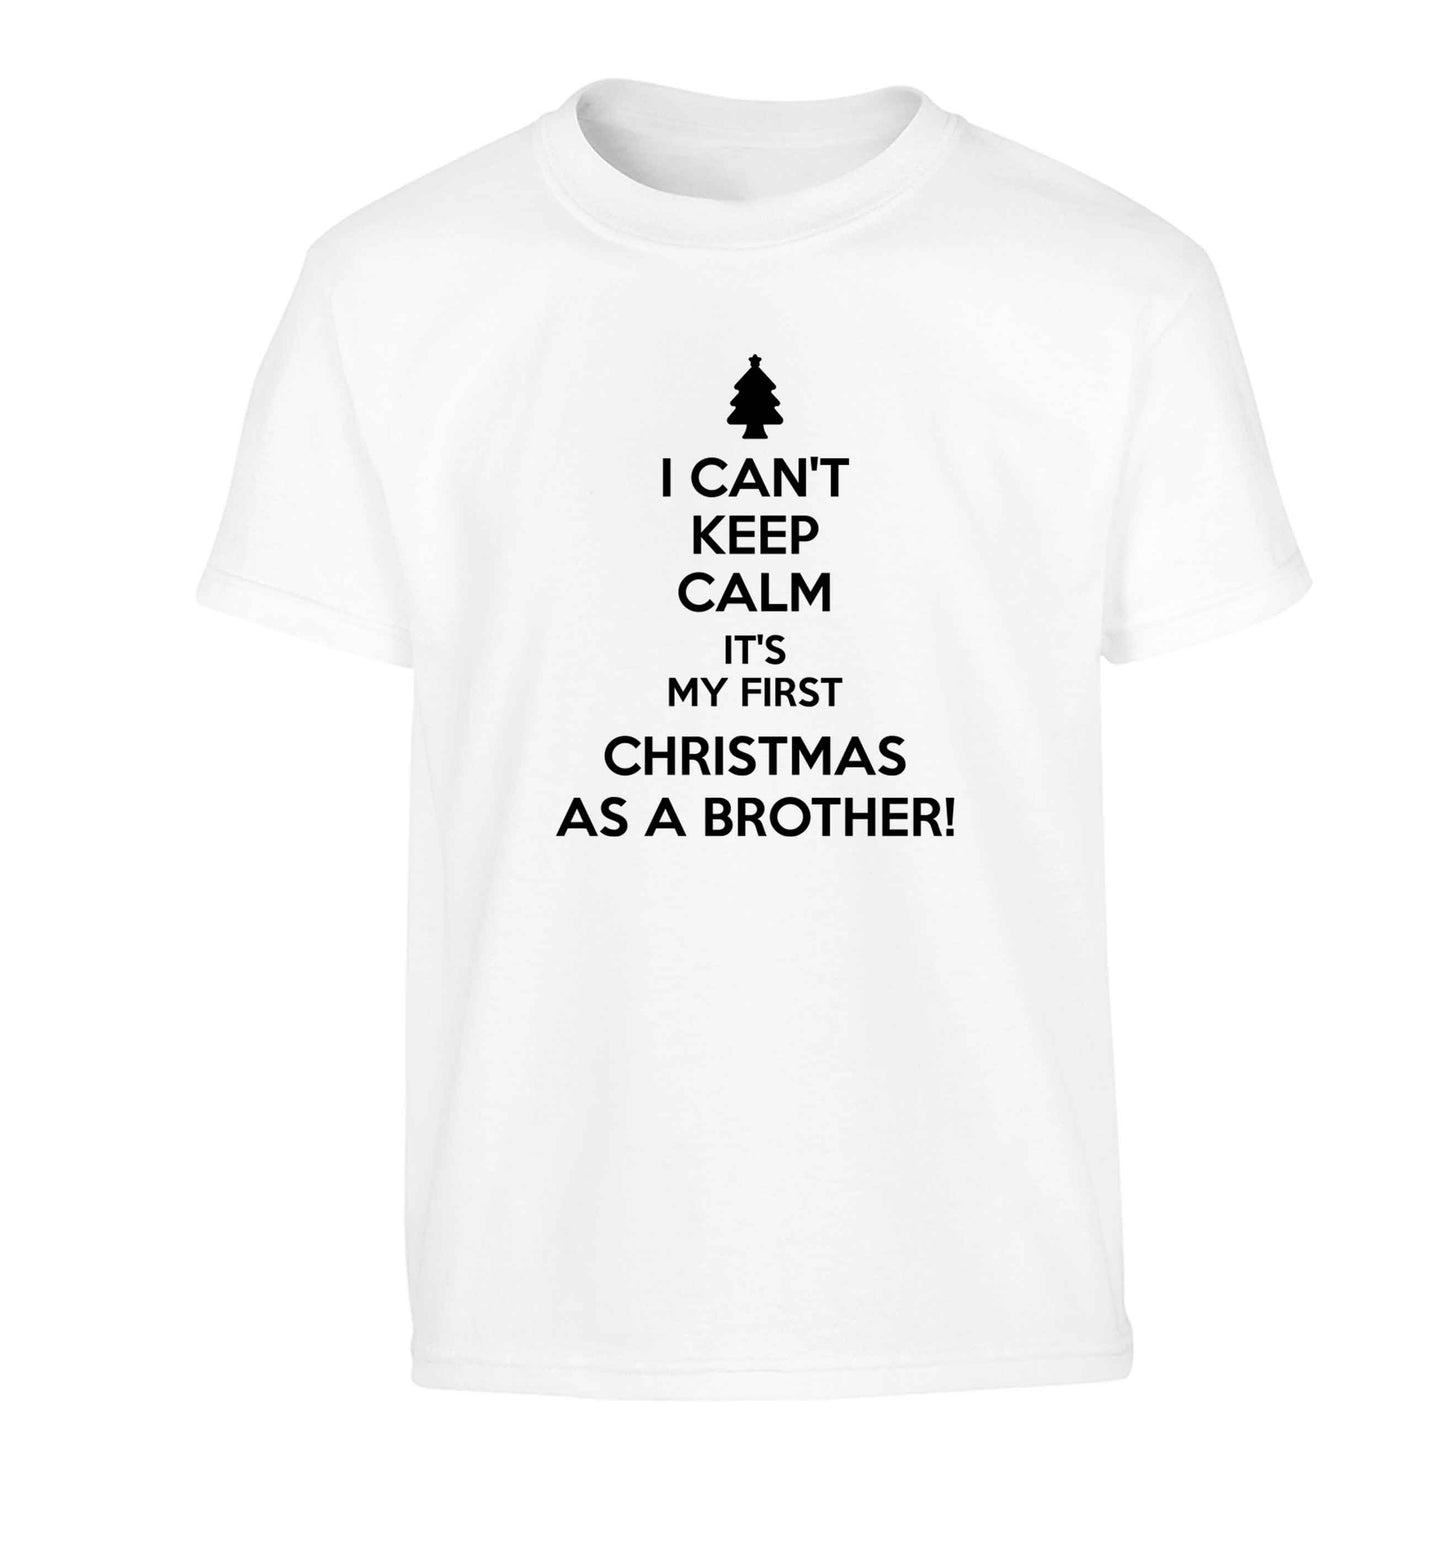 I can't keep calm it's my first Christmas as a brother! Children's white Tshirt 12-13 Years